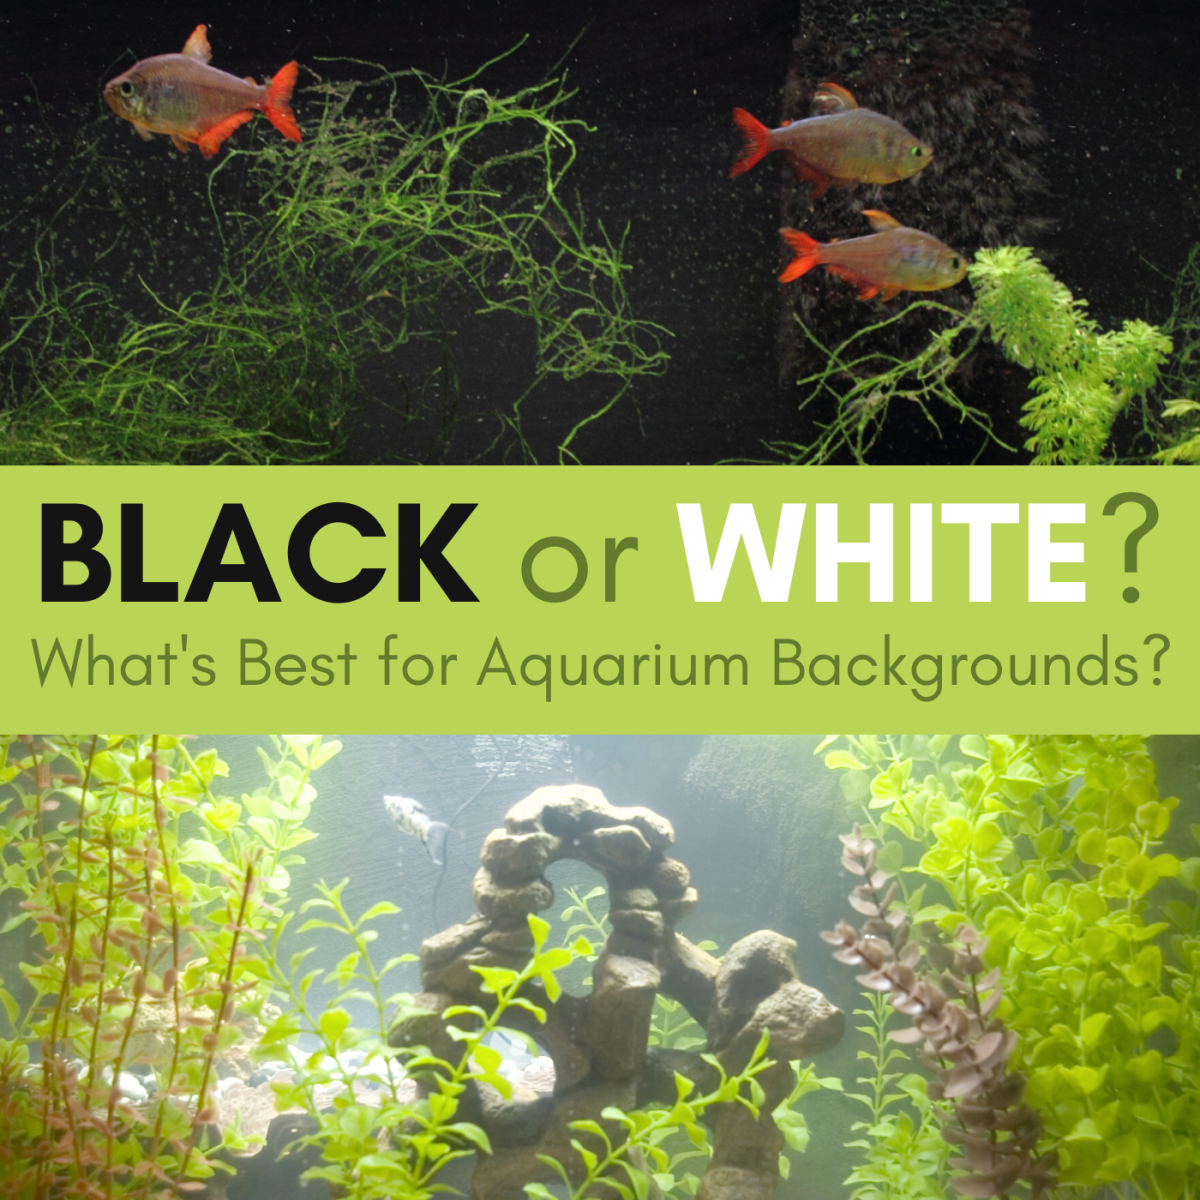 Black or White: Which Is Better for Aquarium Backgrounds? - PetHelpful